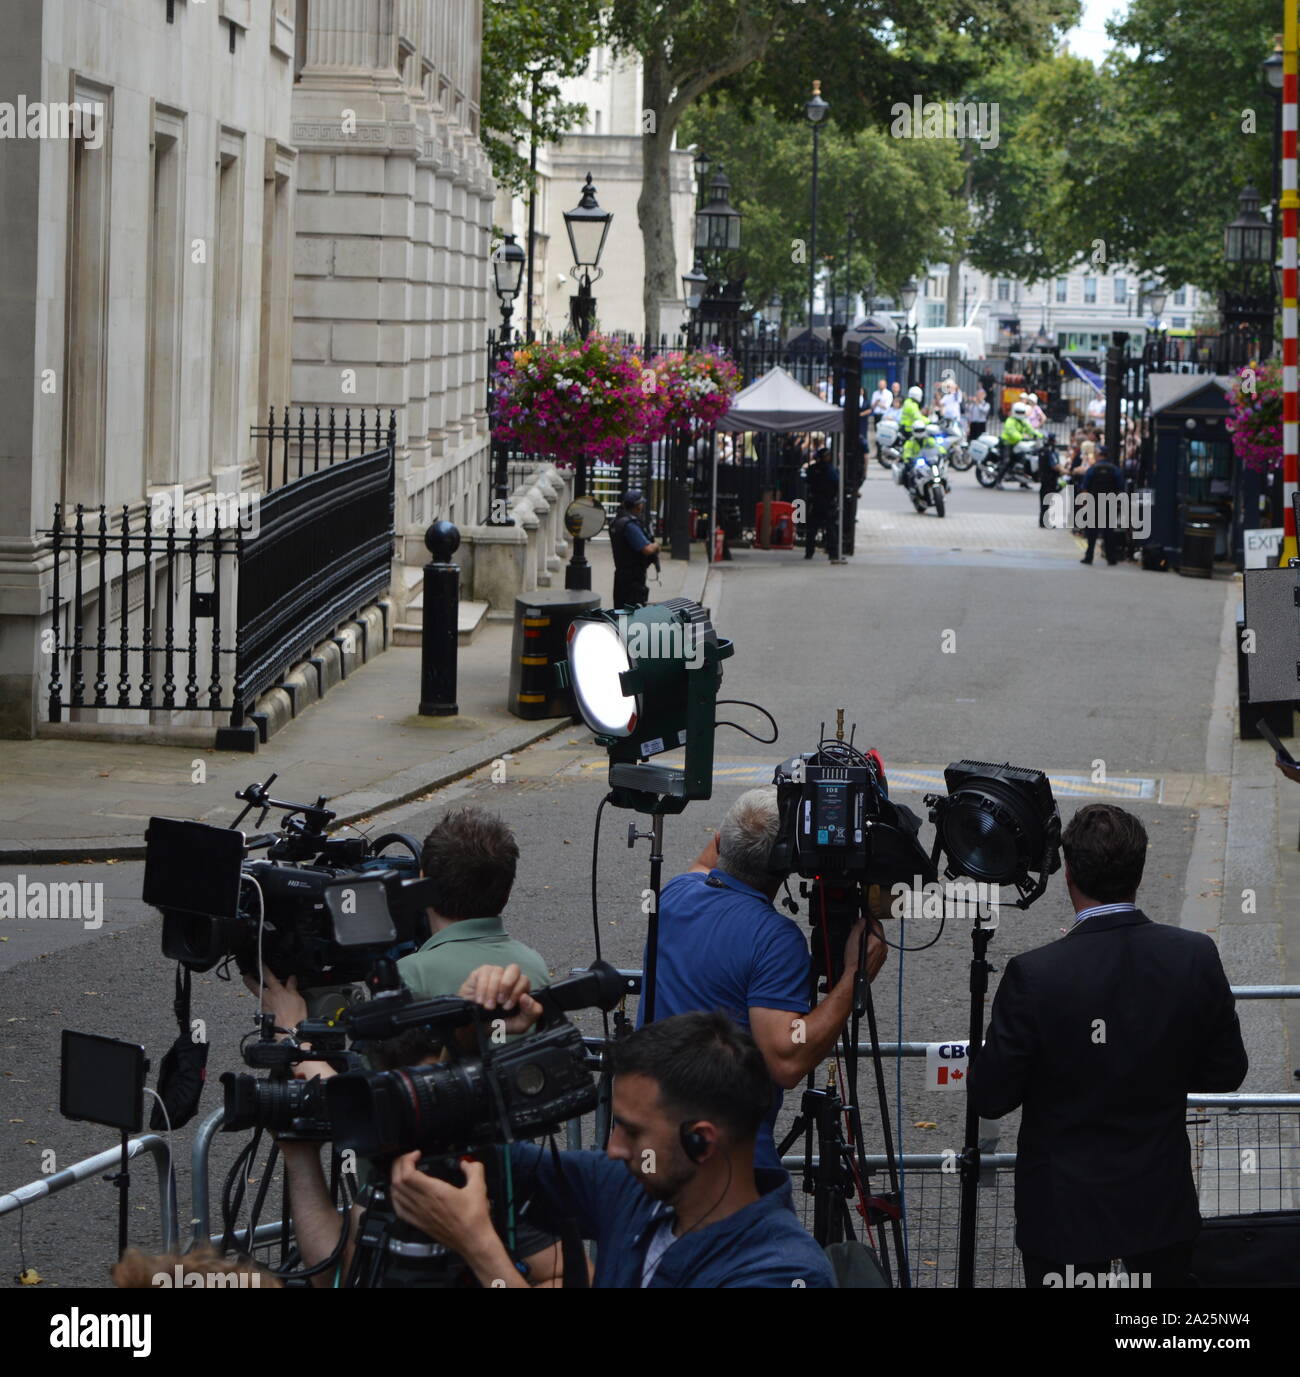 Press gathered in downing street, london, for the arrival of incoming new prime minister, boris johnson. downing street is the official residences and offices of the prime minister of the united kingdom and the chancellor of the exchequer. situated off whitehall, a few minutes' walk from the houses of parliament, downing street was built in the 1680s by sir george downing. Stock Photo